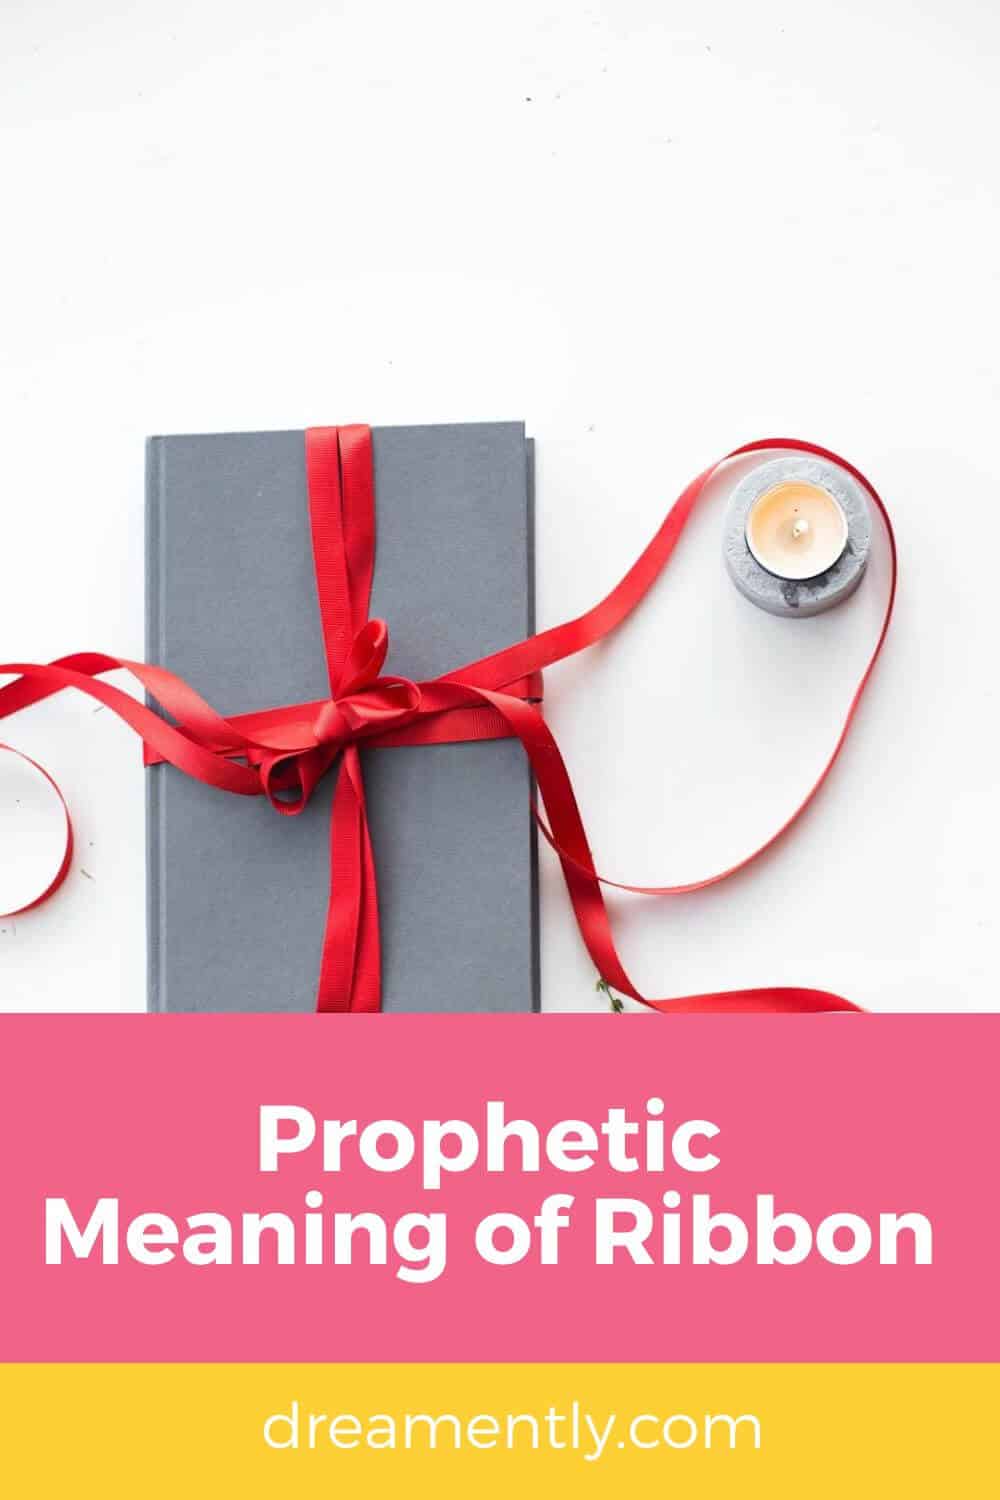 Prophetic Meaning of Ribbon (1)